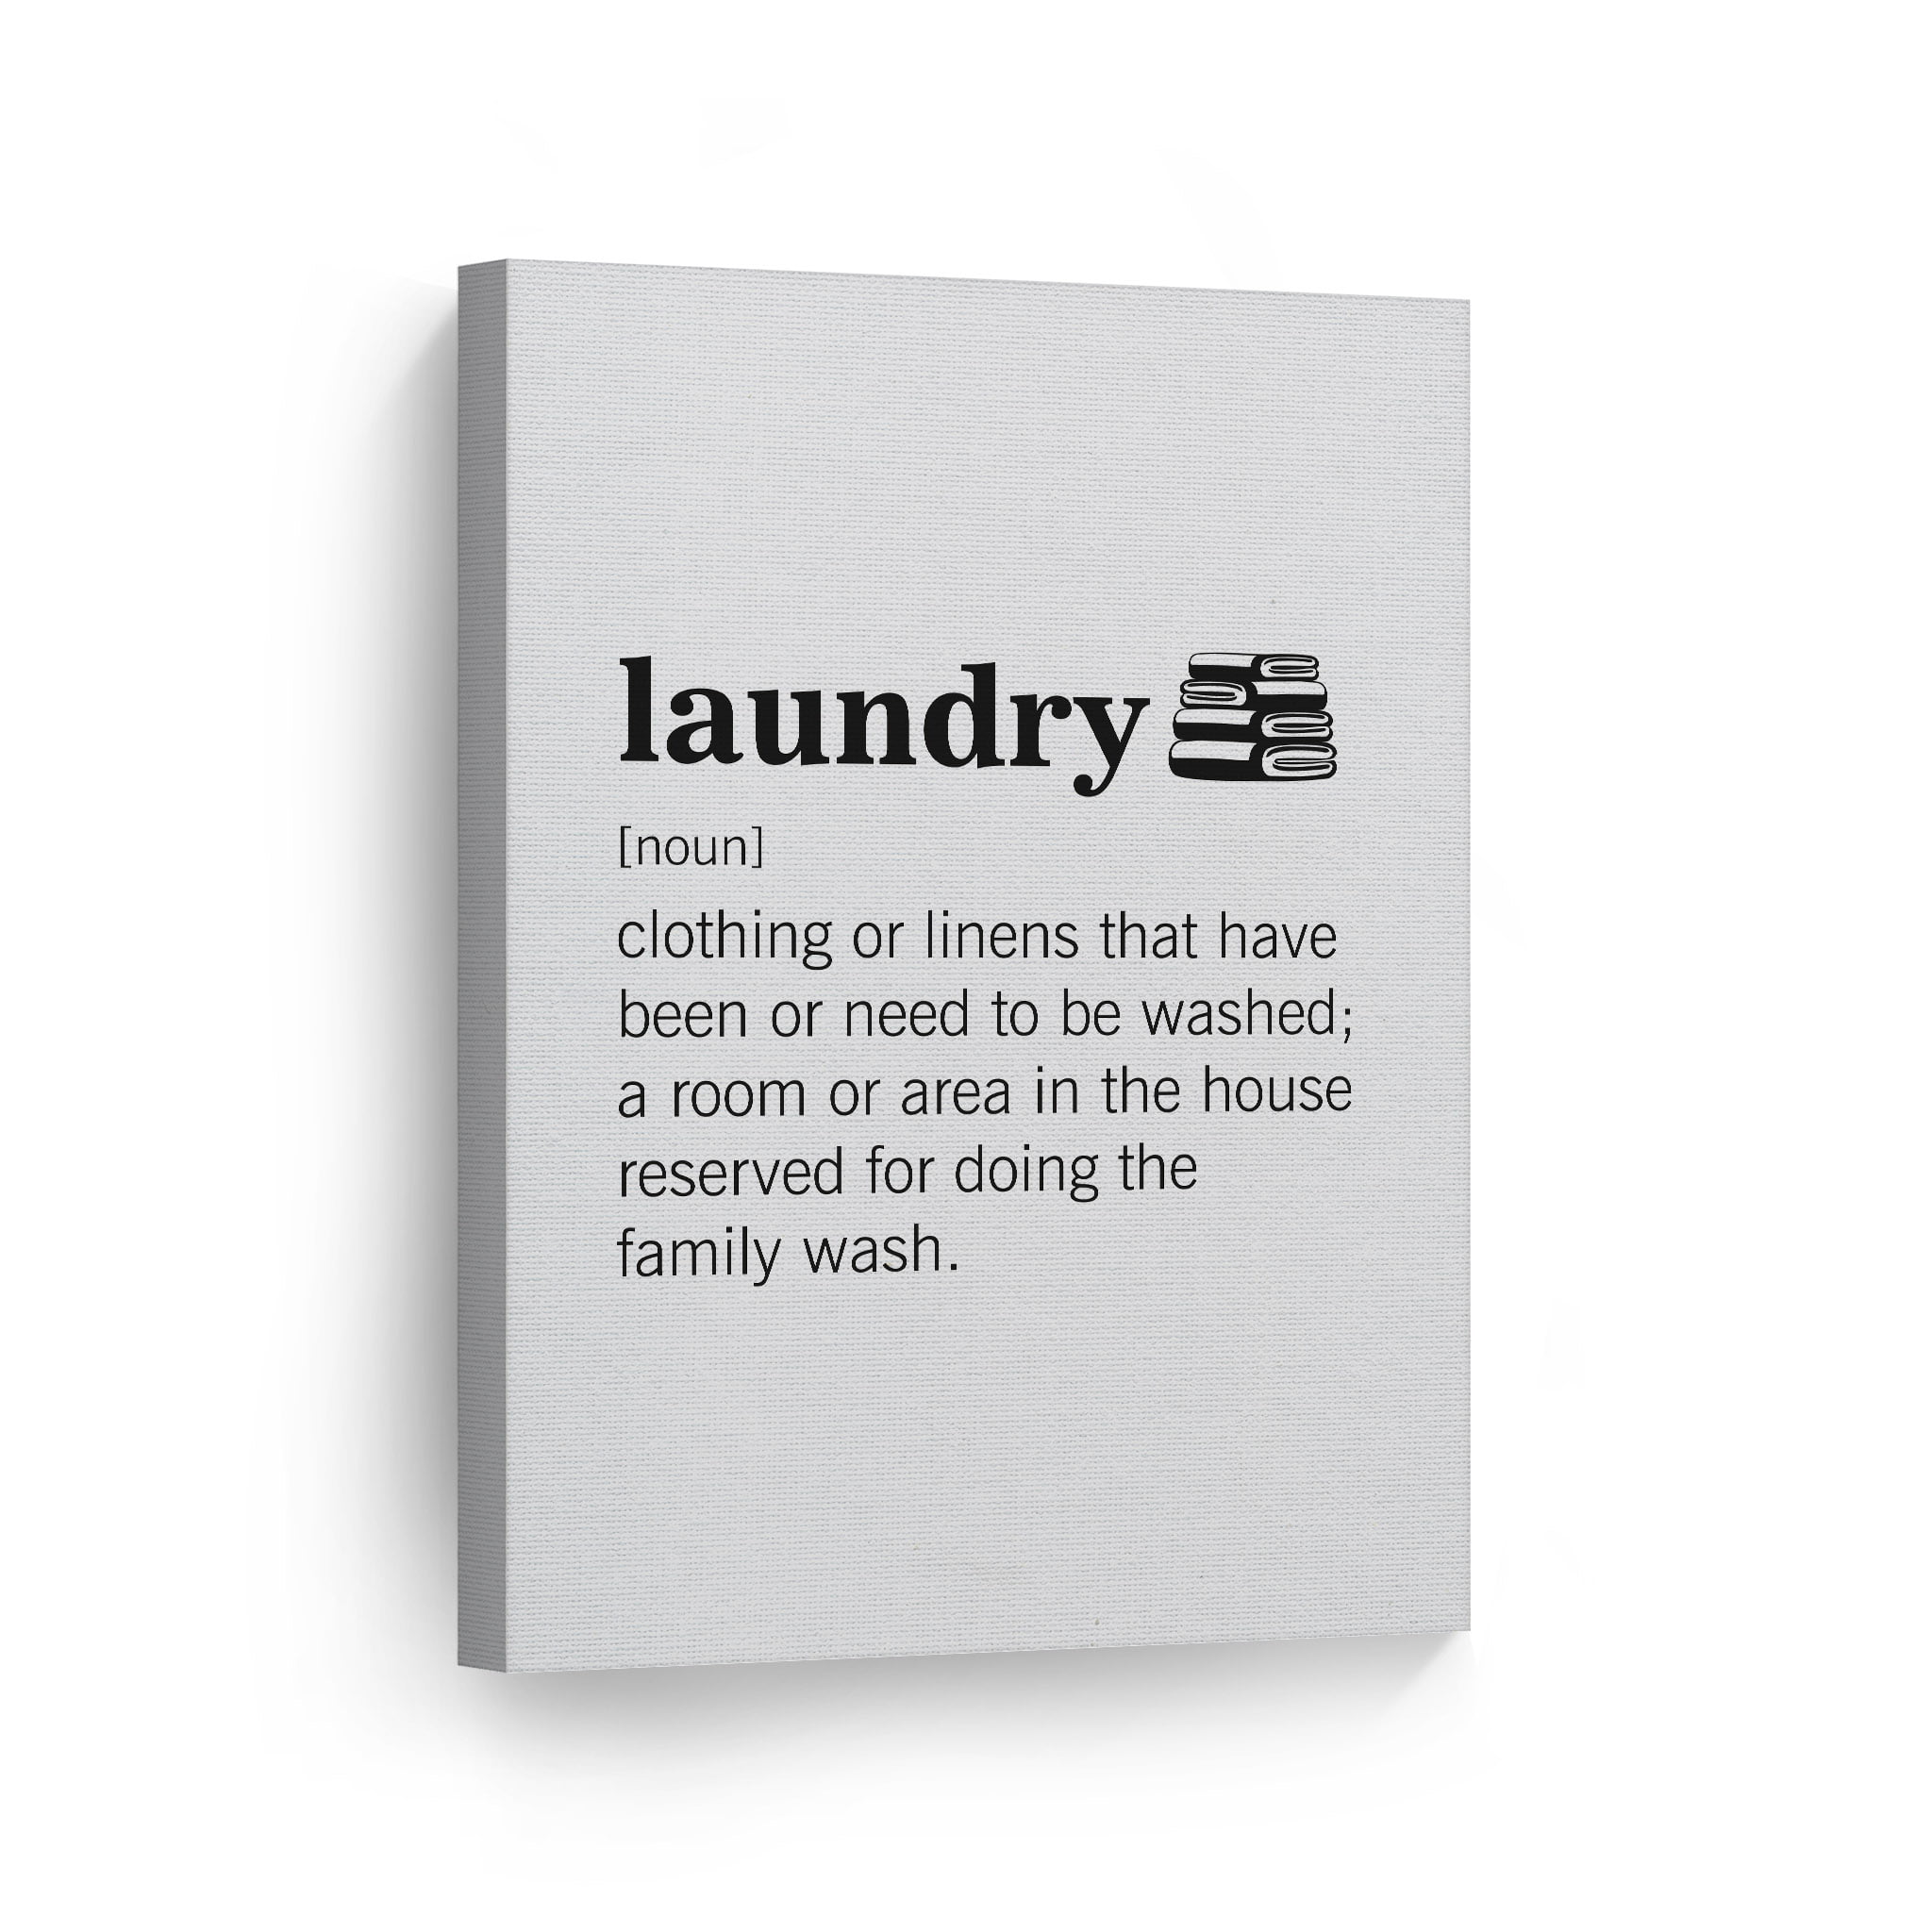 Utility Room Funny Definition Wall Art Laundry Quotes Sign Laundry Definition Print Modern Laundry Room Art Funny Laundry Decor